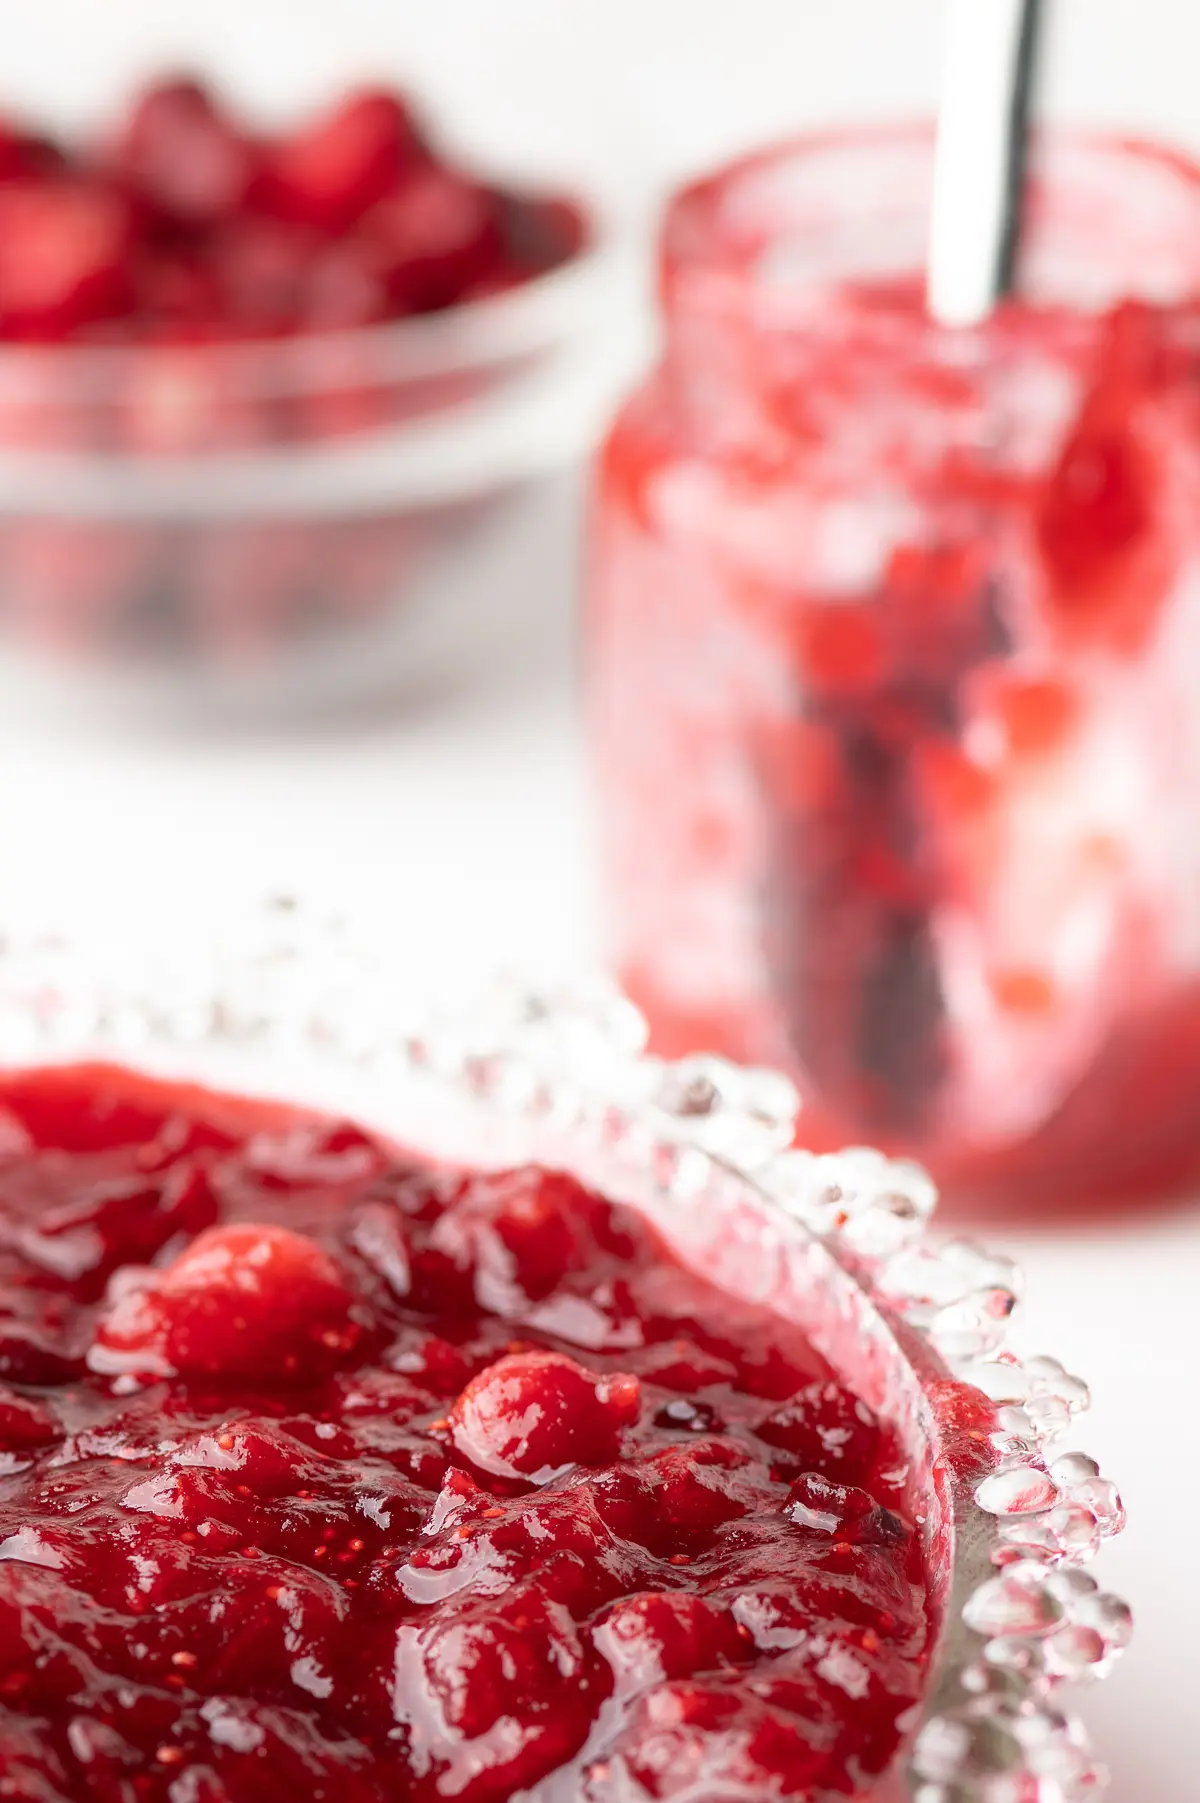 A bowl filled with bright red cranberry sauce and an empty jar with a spoon all against a bright white background